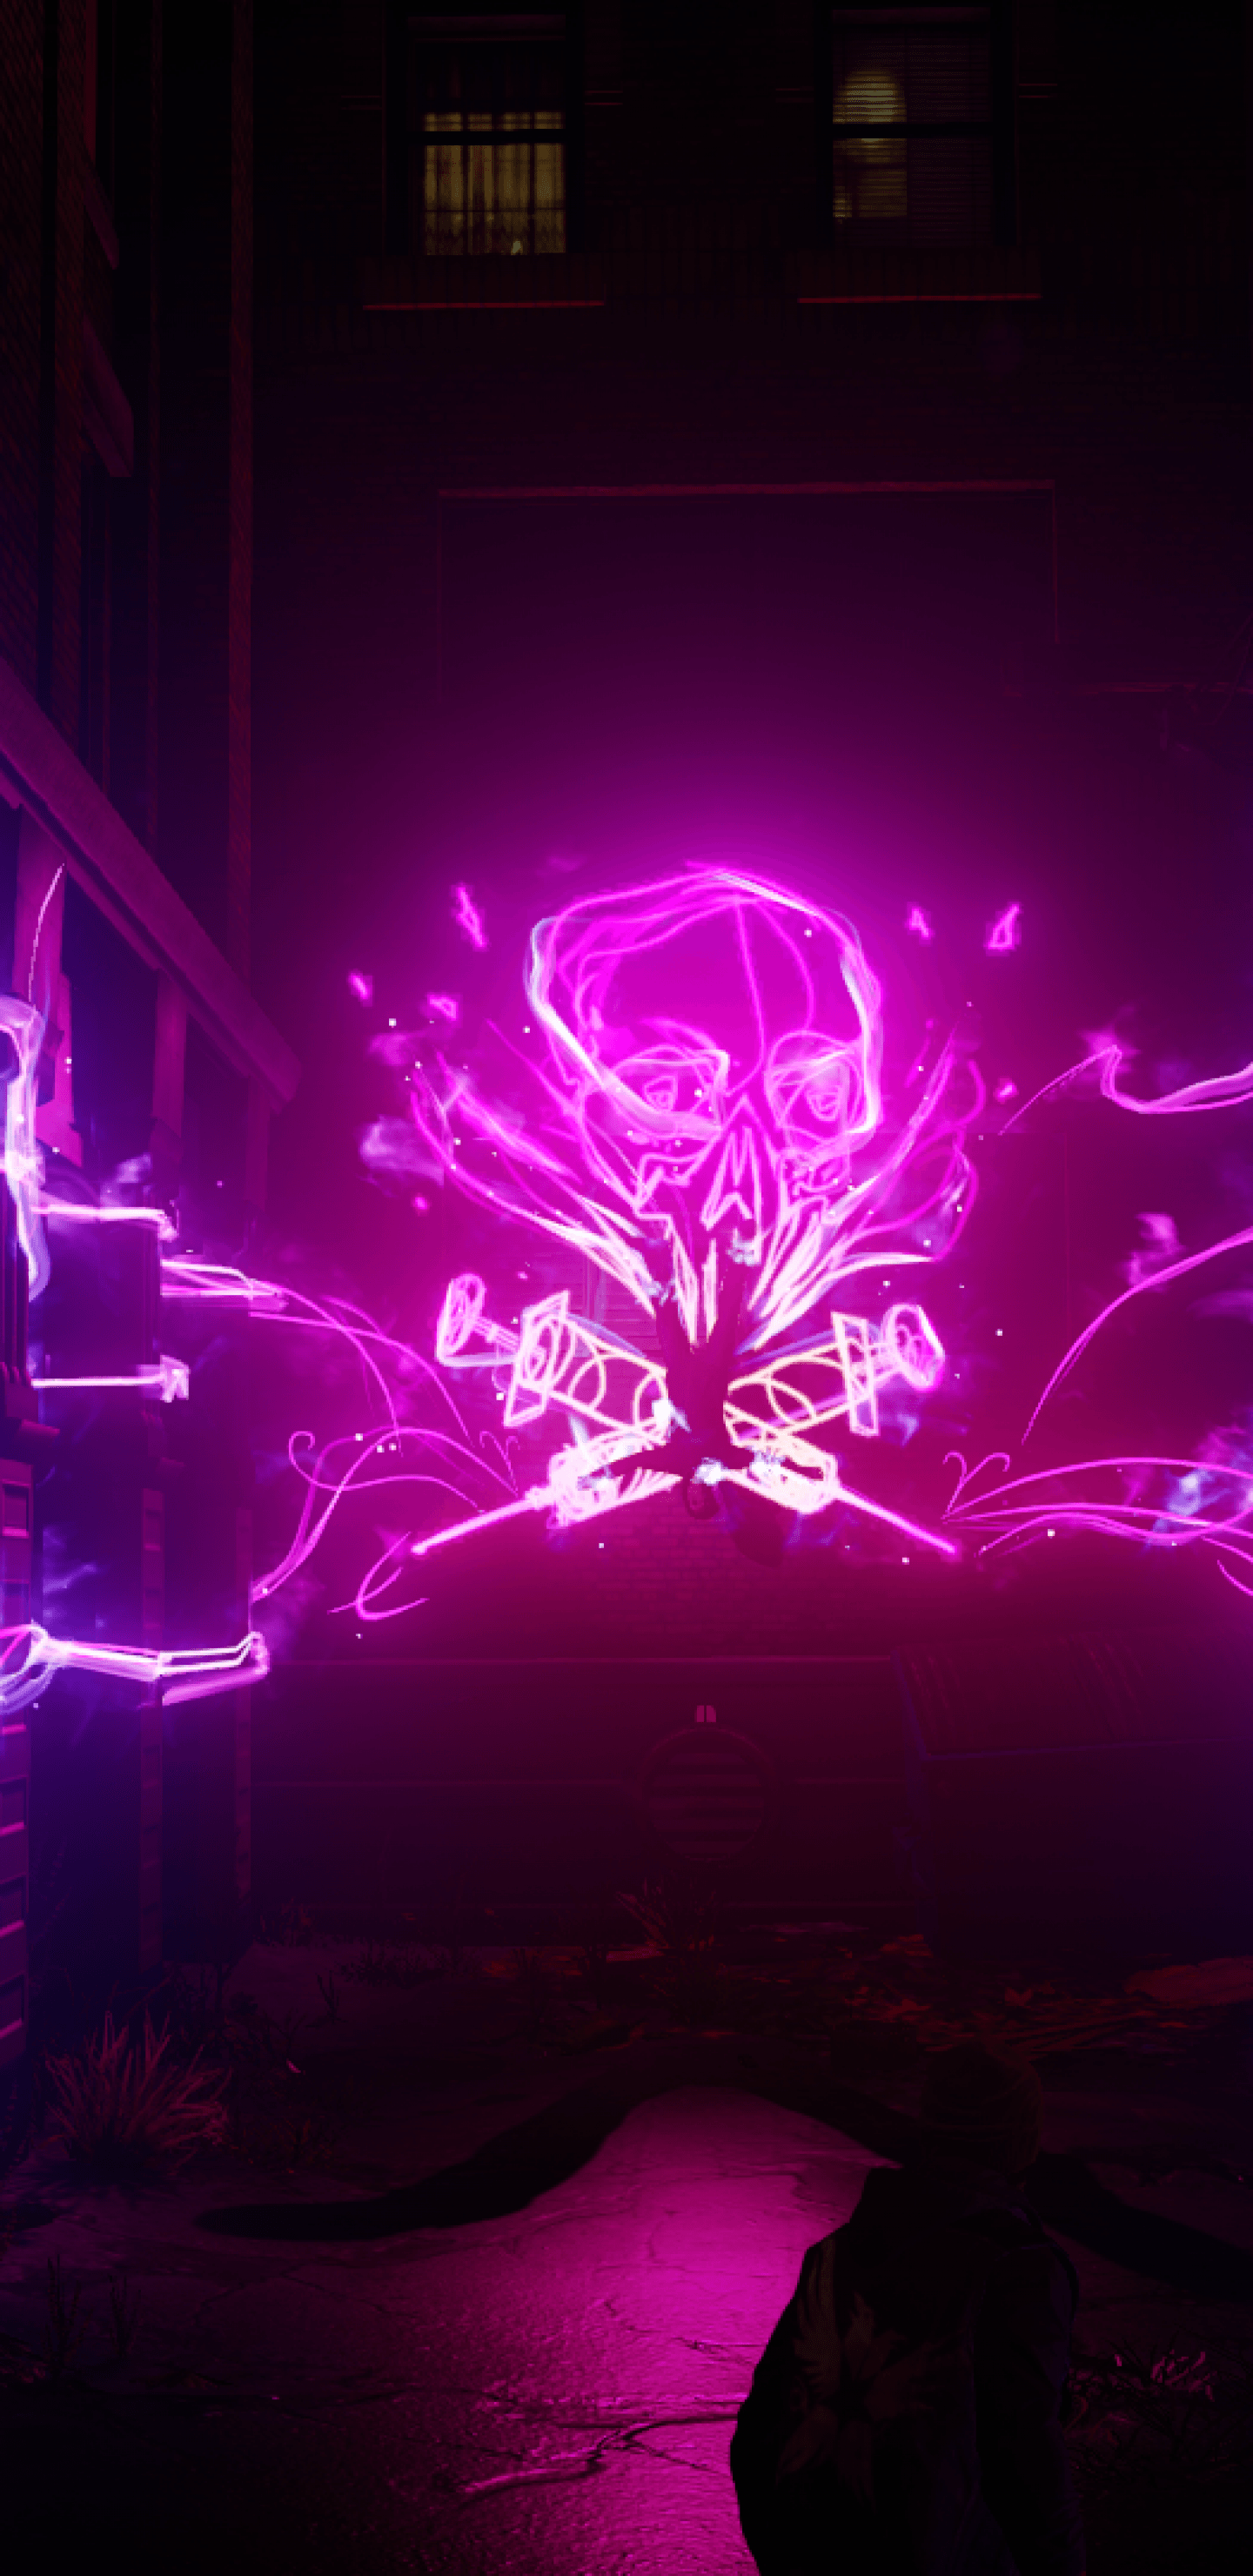 Download 1440x2960 Infamous: Second Son, Back Street, Neon Skull